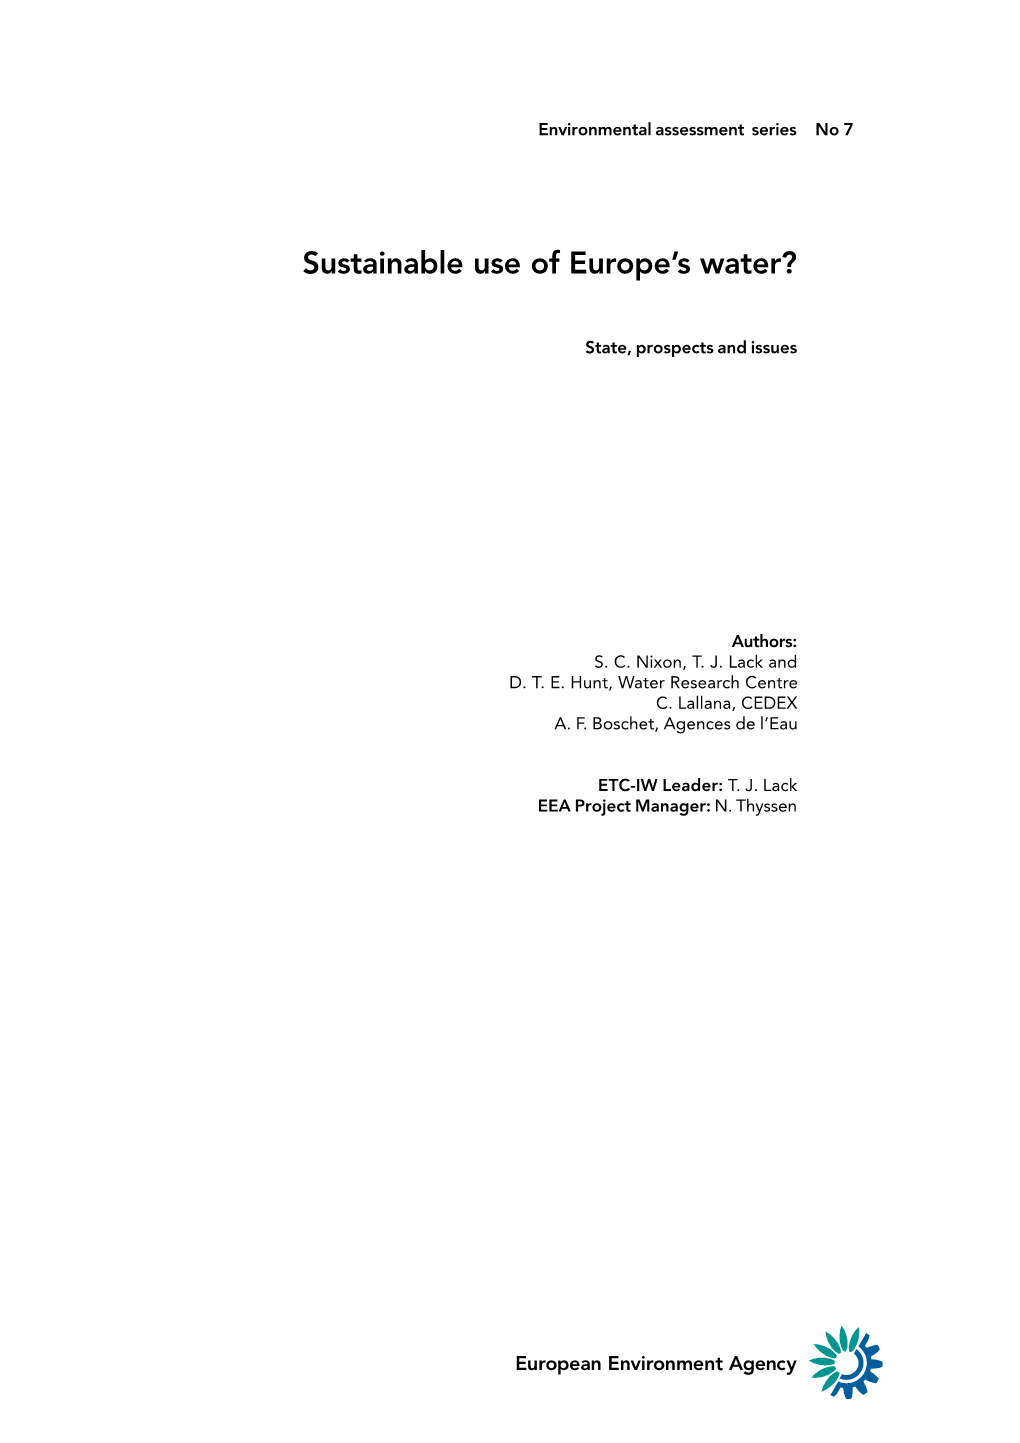 Sustainable Use of Europe's Water?